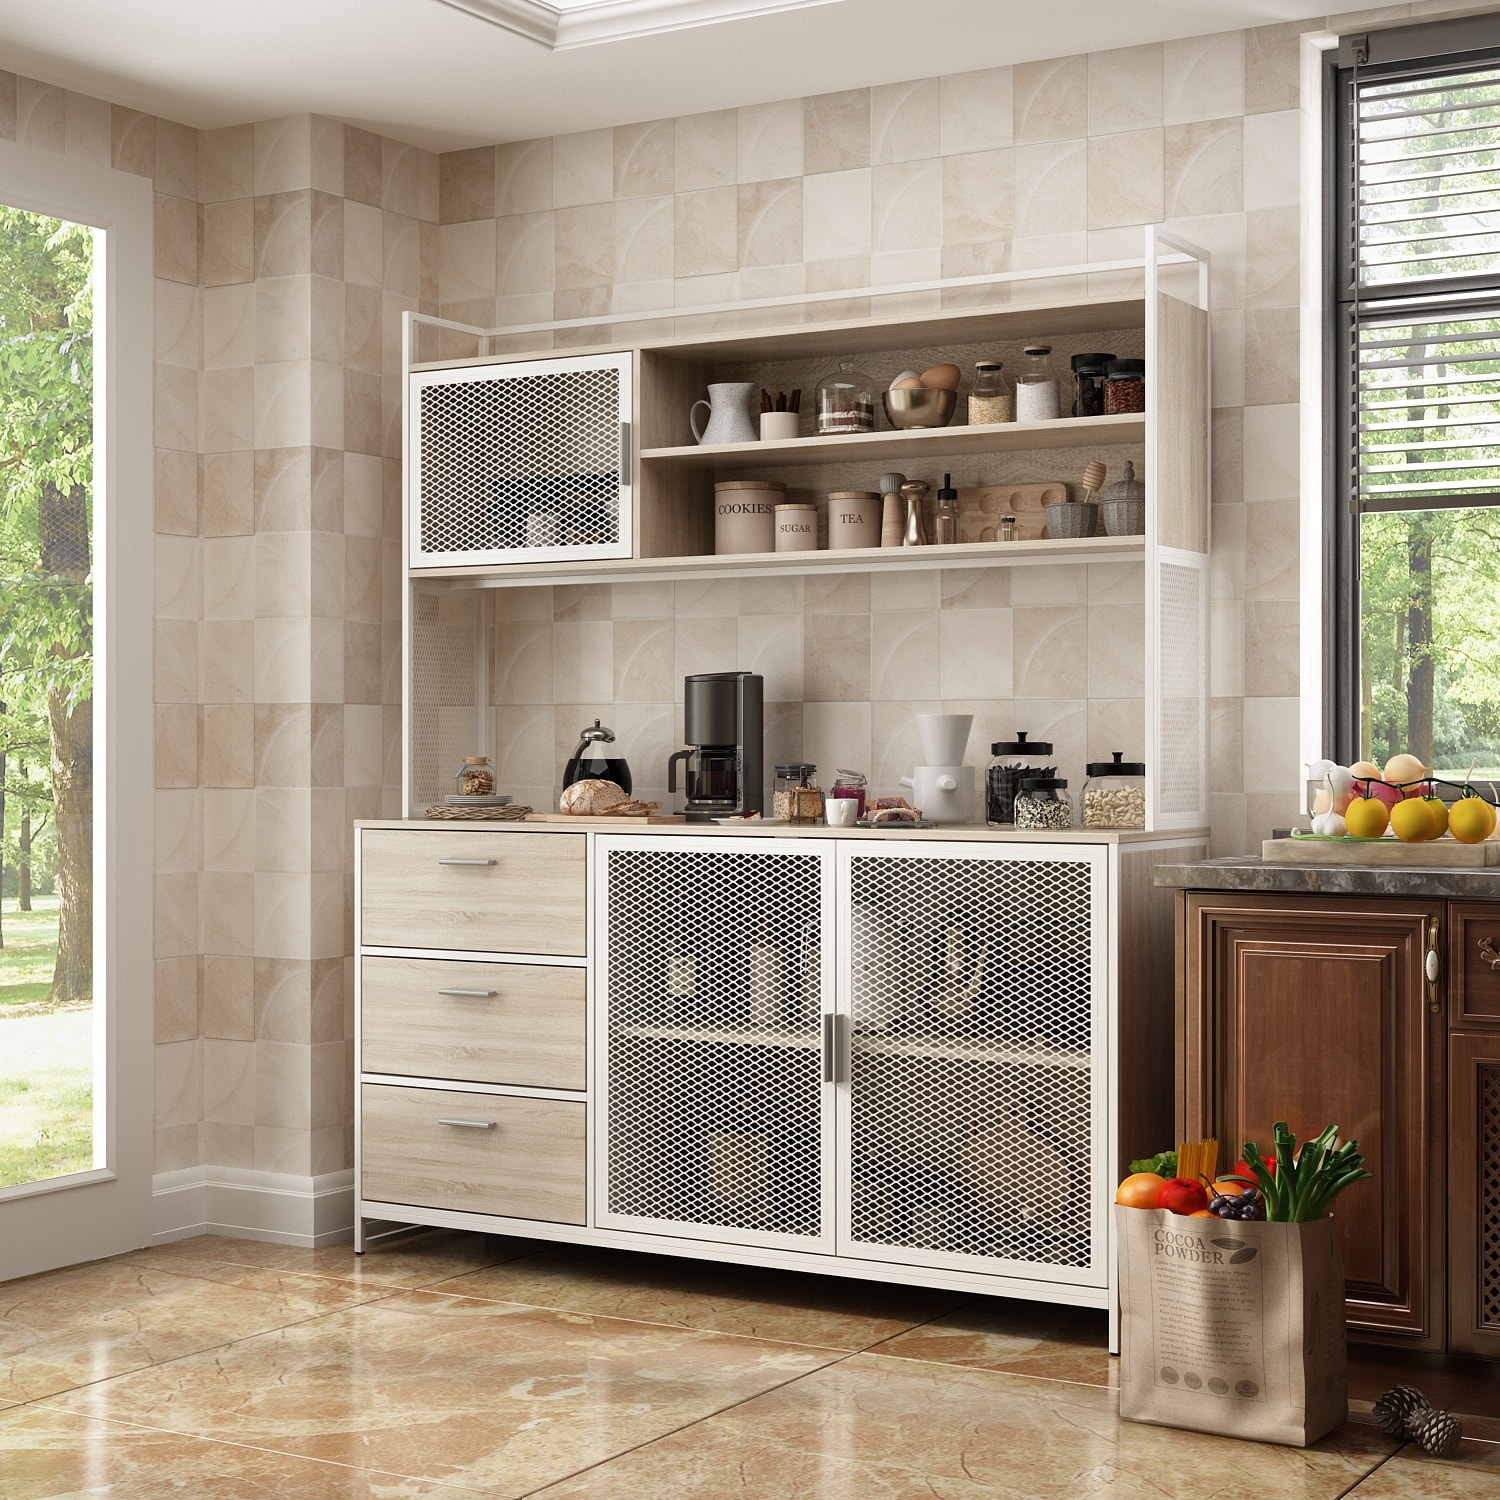 https://ak1.ostkcdn.com/images/products/is/images/direct/d191d227e99fad6f307ec38847961173fb0f582b/59%22W-Kitchen-Cabinet-Pantry-with-Sleek-Design-%26-Ample-Storage.jpg